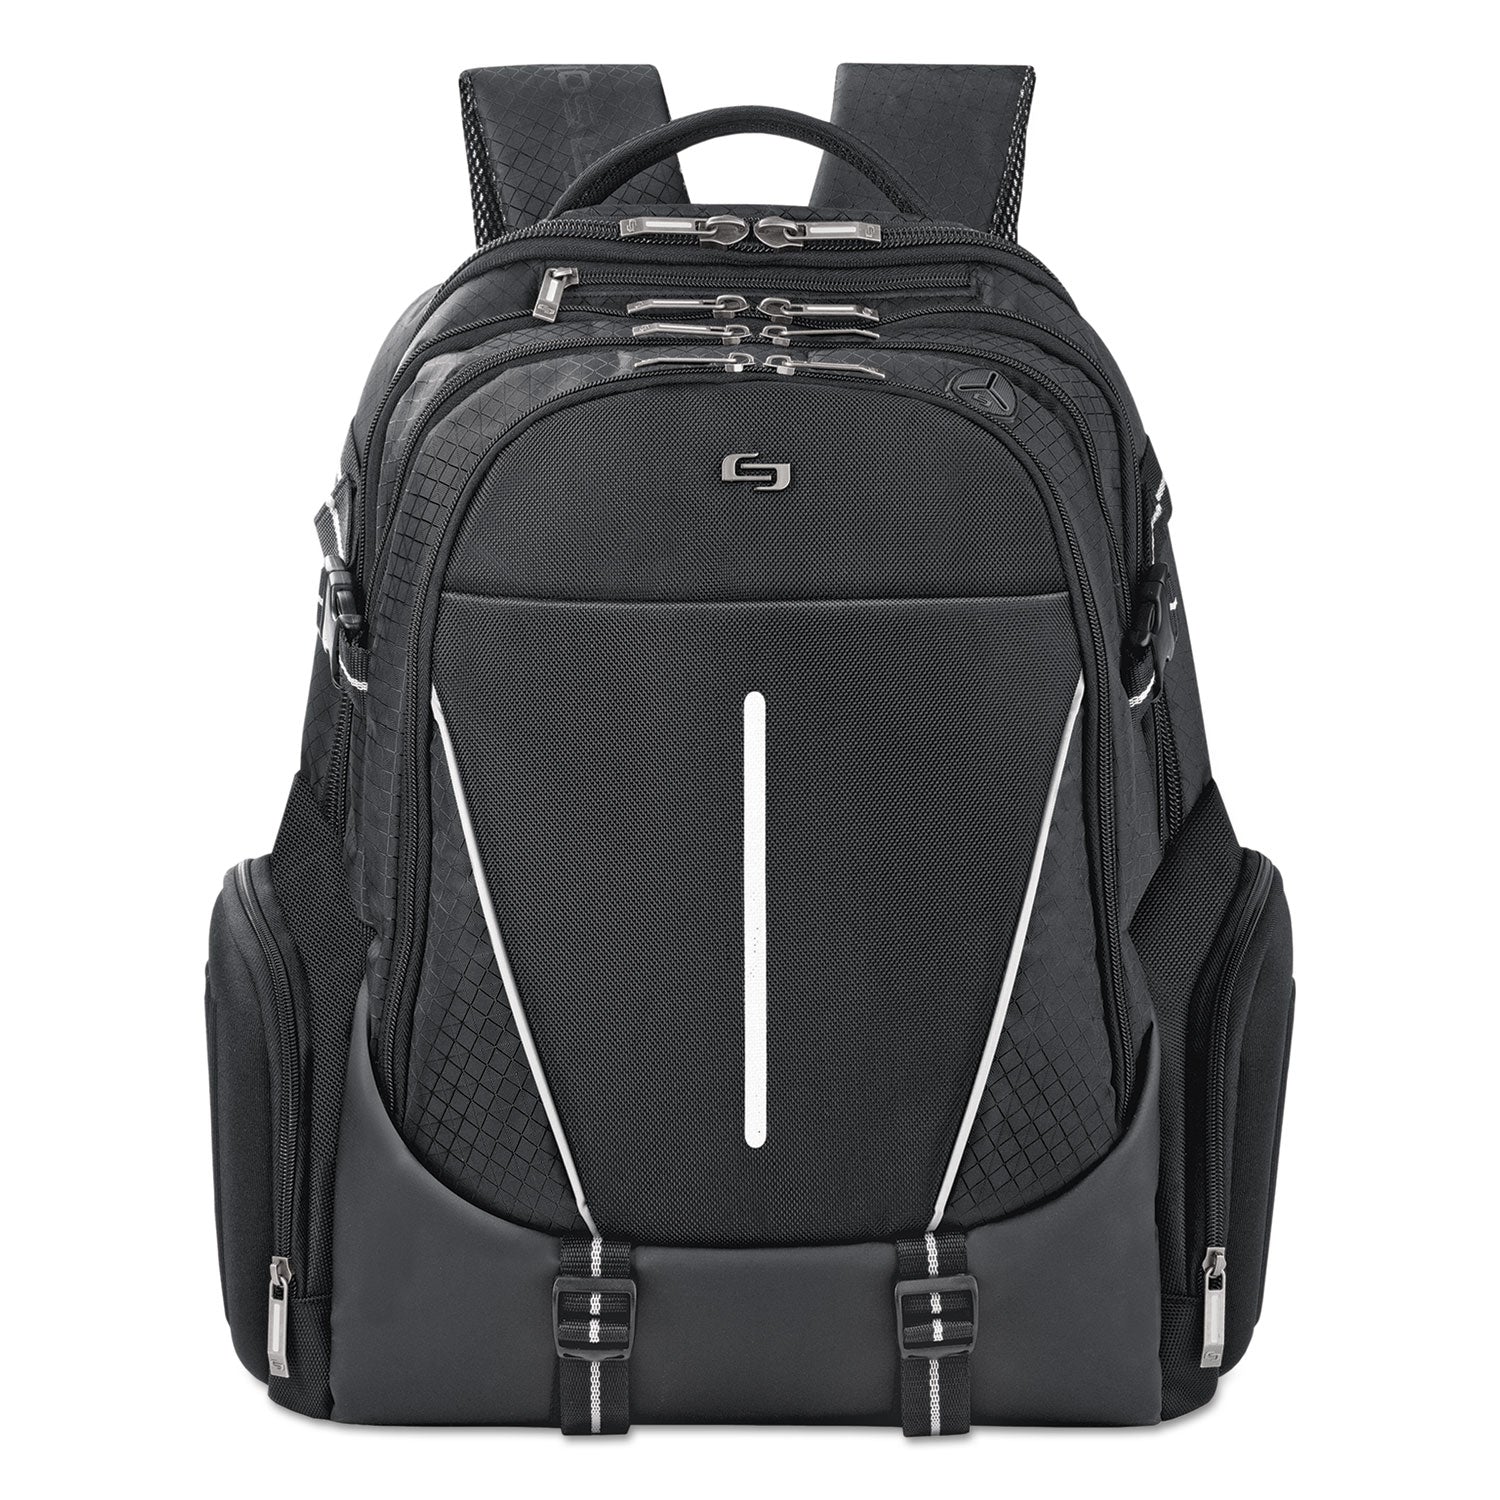 Active Laptop Backpack, Fits Devices Up to 17.3", Polyester, 12.5 x 6.5 x 19, Black - 